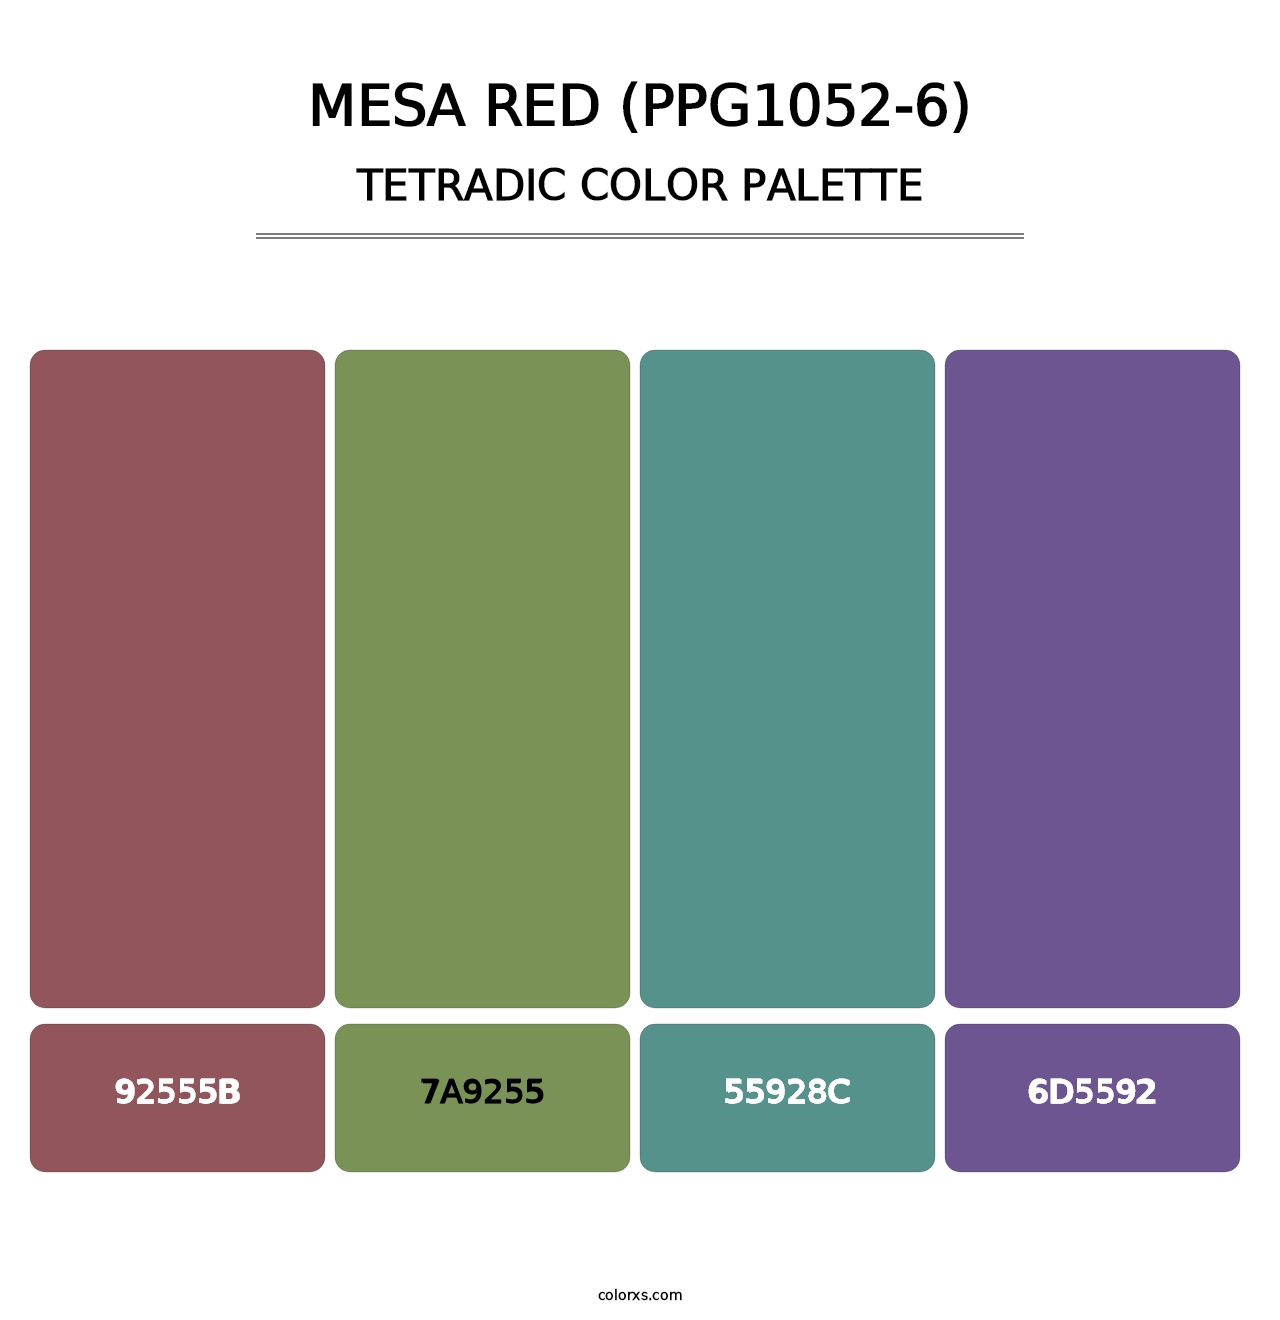 Mesa Red (PPG1052-6) - Tetradic Color Palette